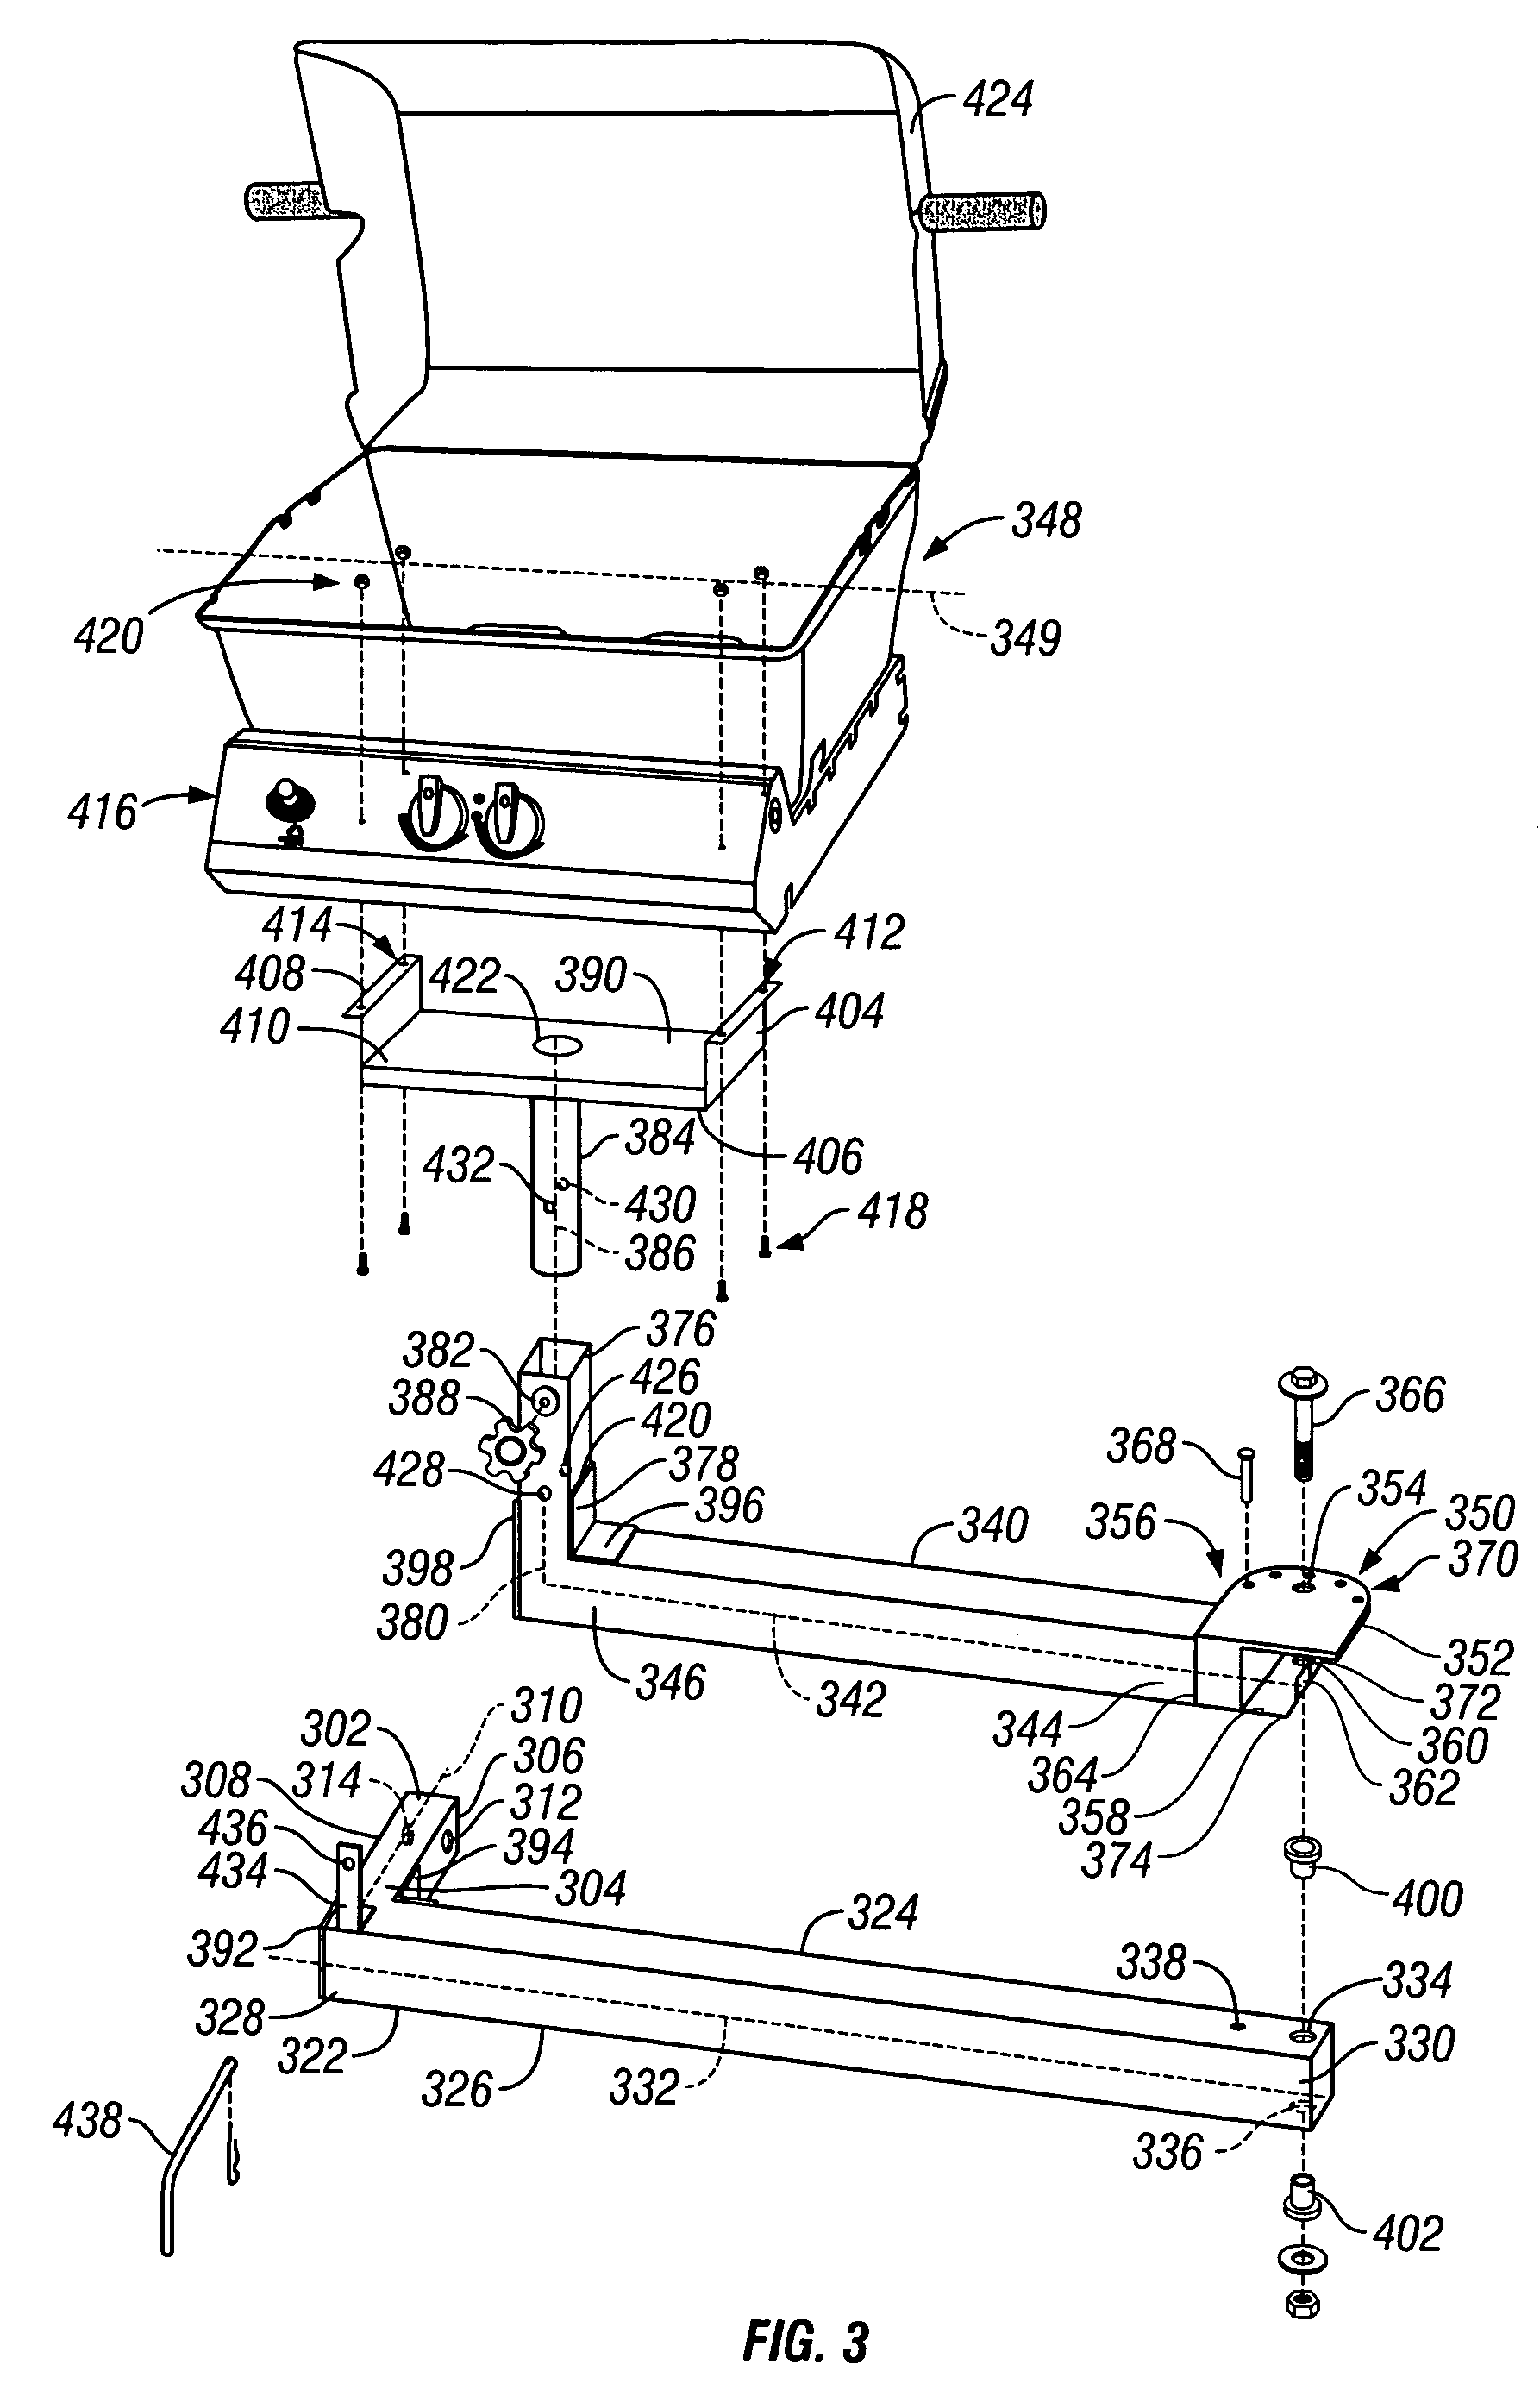 Swingable apparatus attachable to a vehicle for transporting a device and permitting access to the vehicle